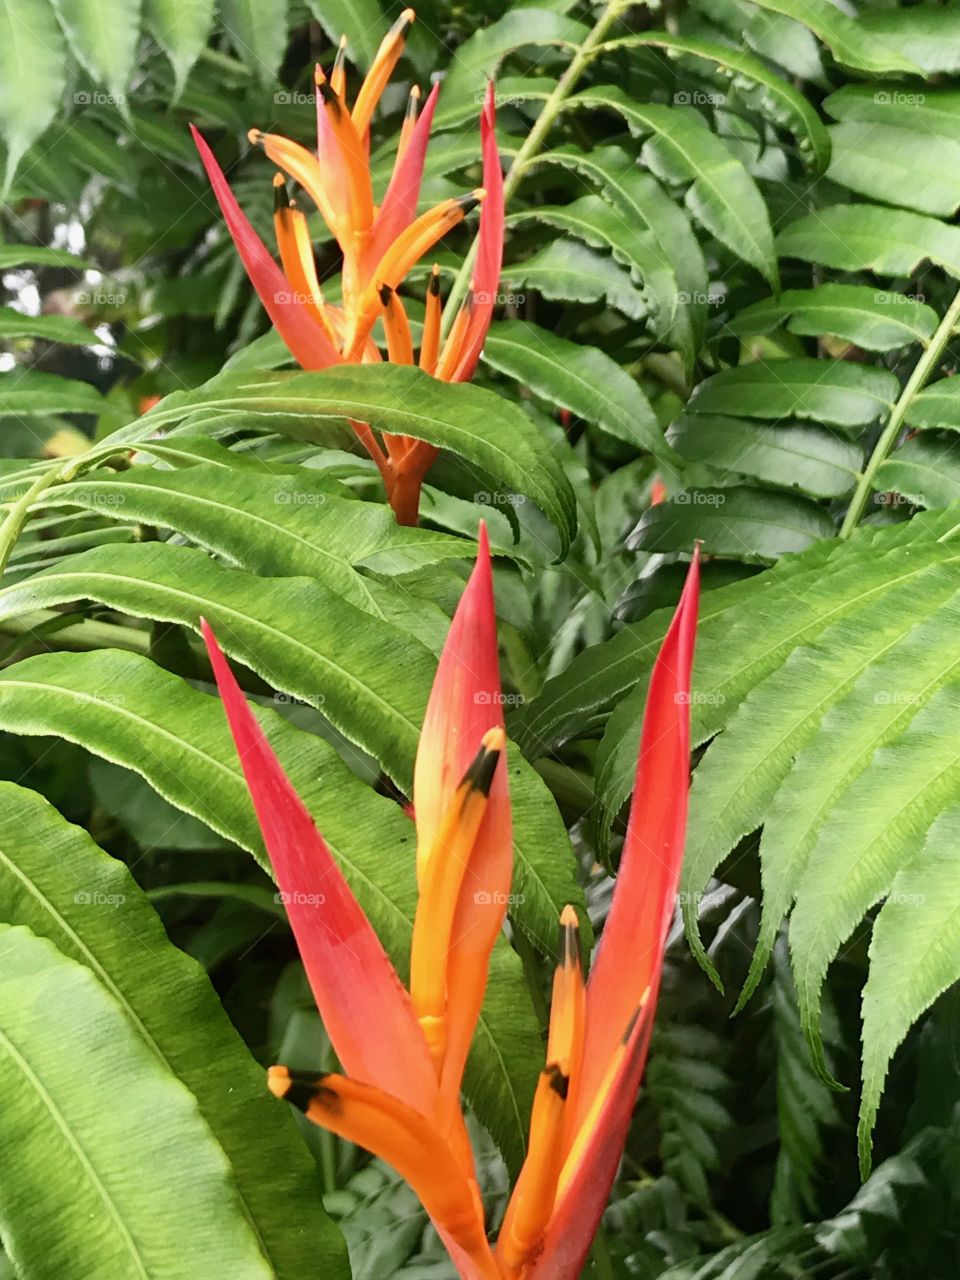 Tropical flowers peeking through a bed of leaves